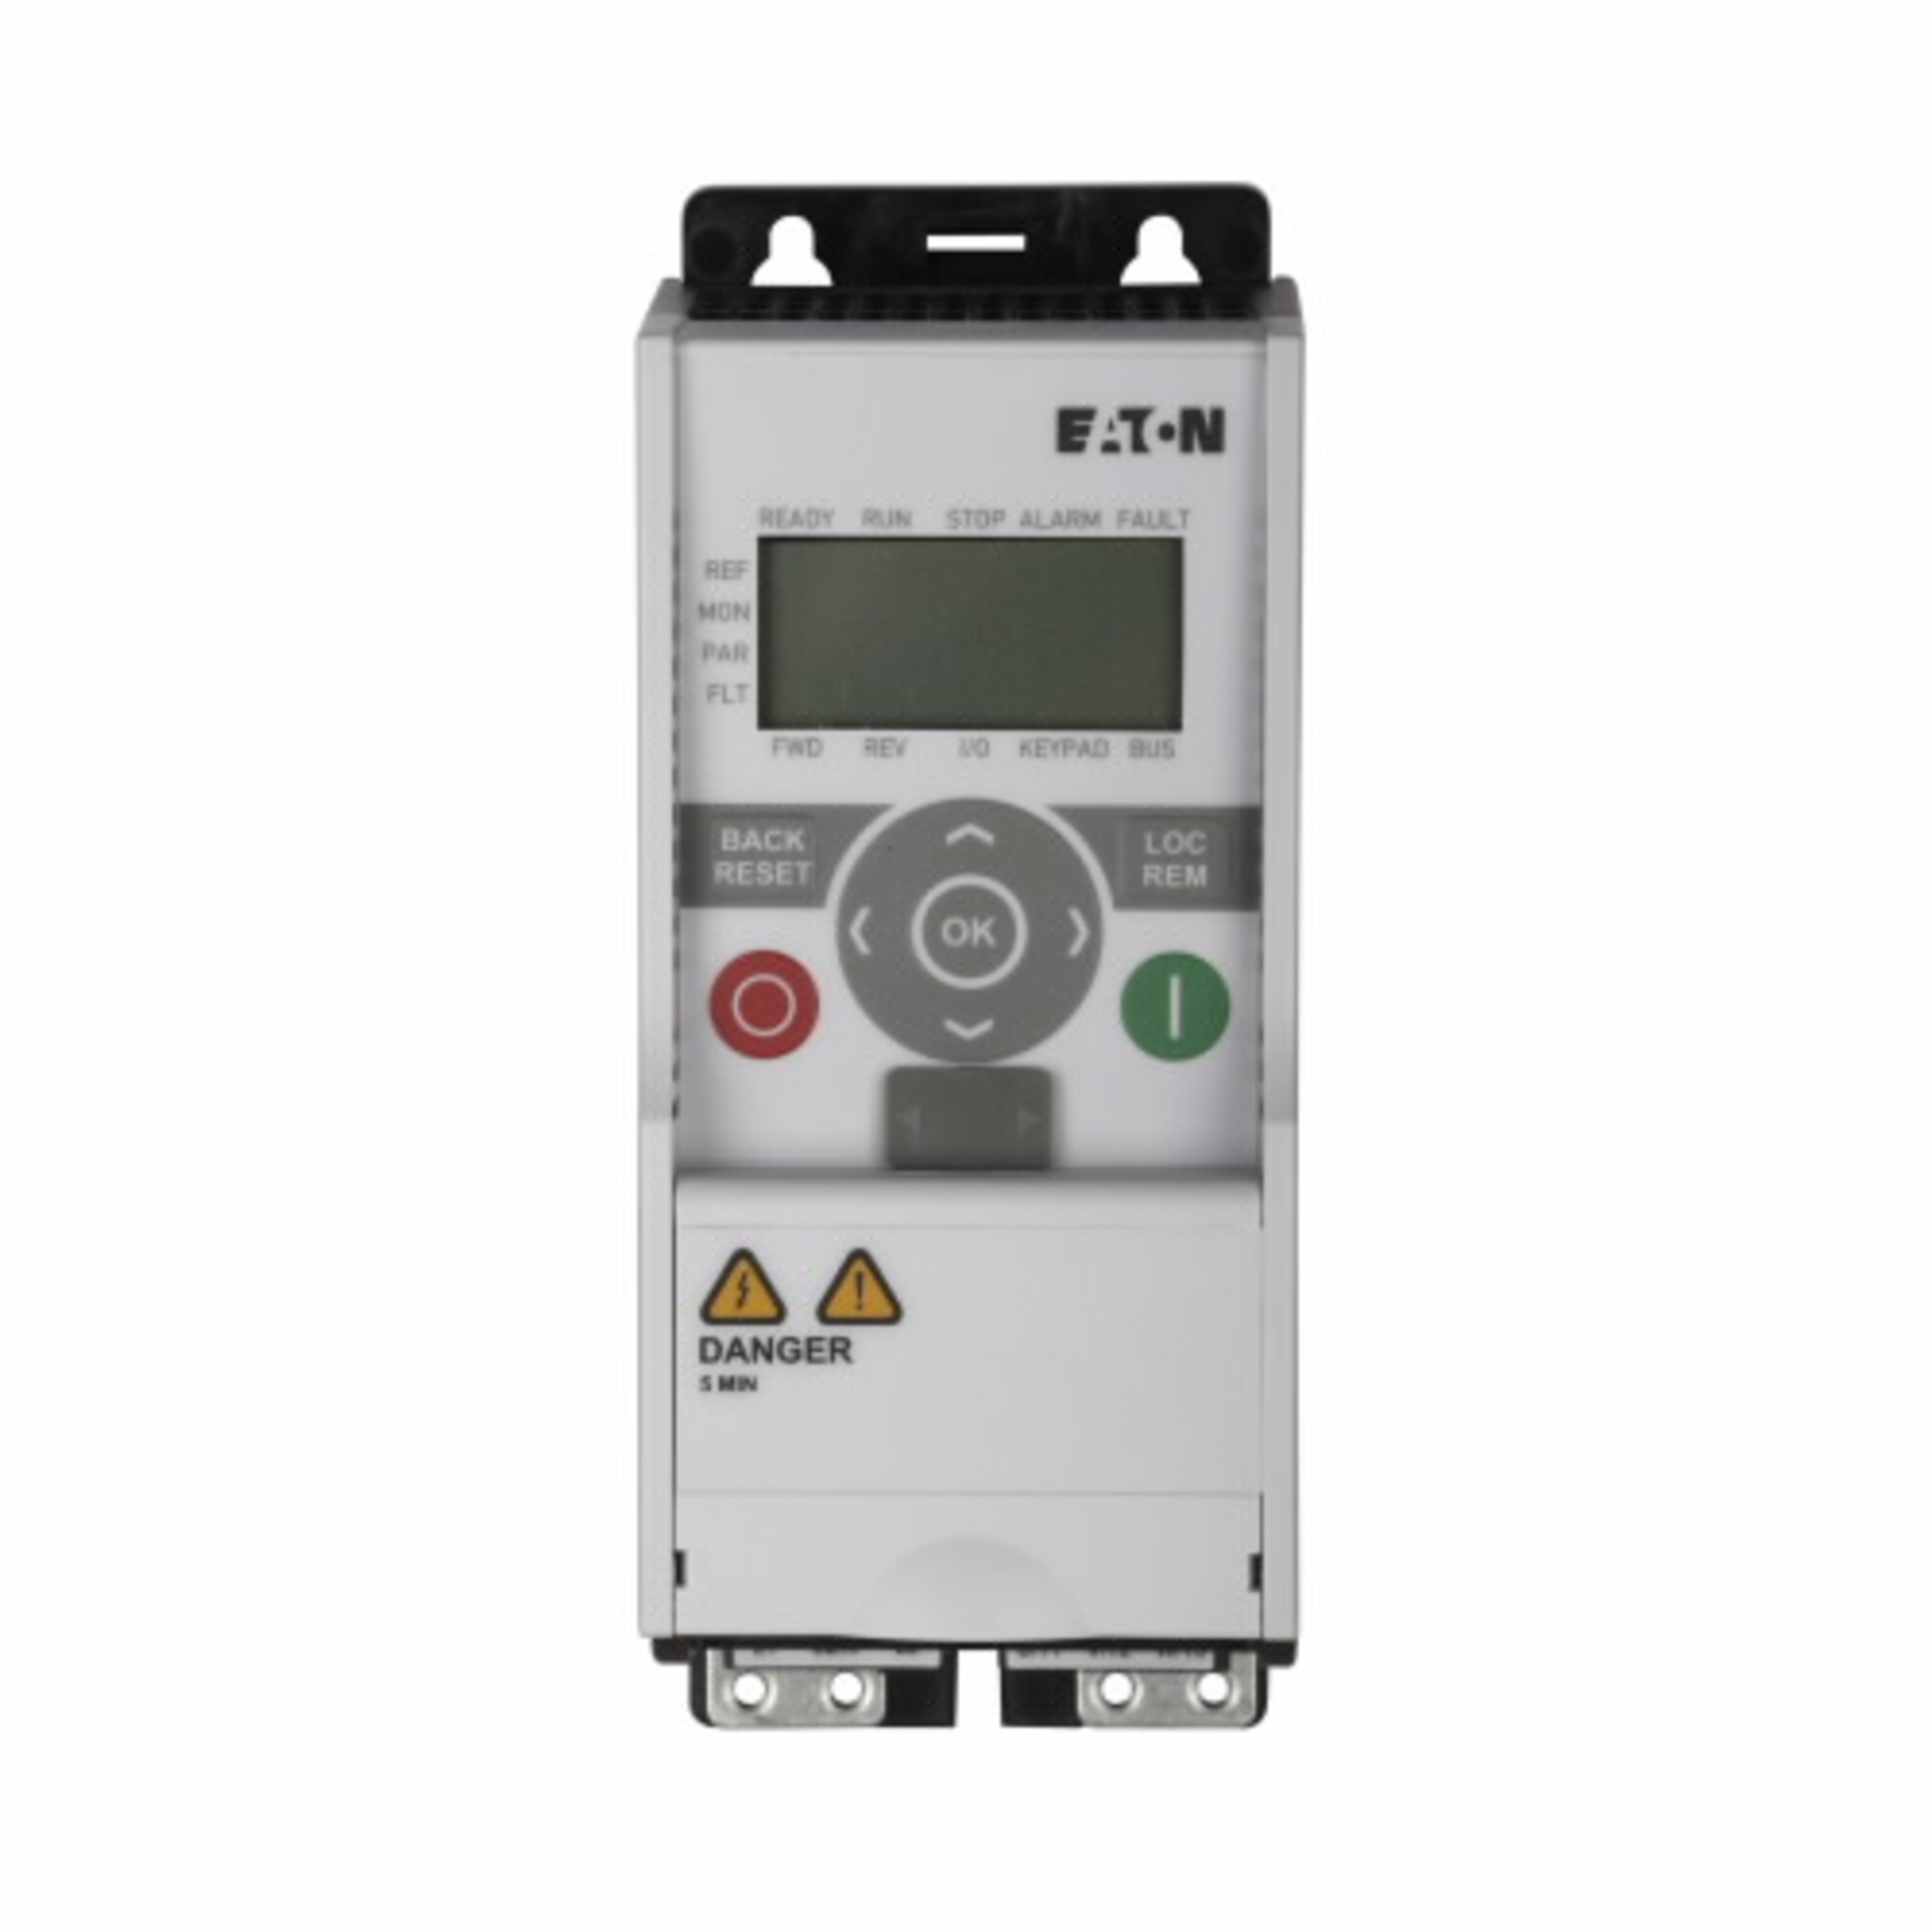 Eaton MMX12AA1D7F0-0 Eaton | Cutler Hammer MMX12AA1D7F0-0  Variable Frequency Drives AC Drives – 240VAC – 1 Phase https://gesrepair.com/wp-content/uploads/2022/Eaton/Images/Eaton_MMX12AA1D7F0-0_Variable_Frequency_Drive.jpg